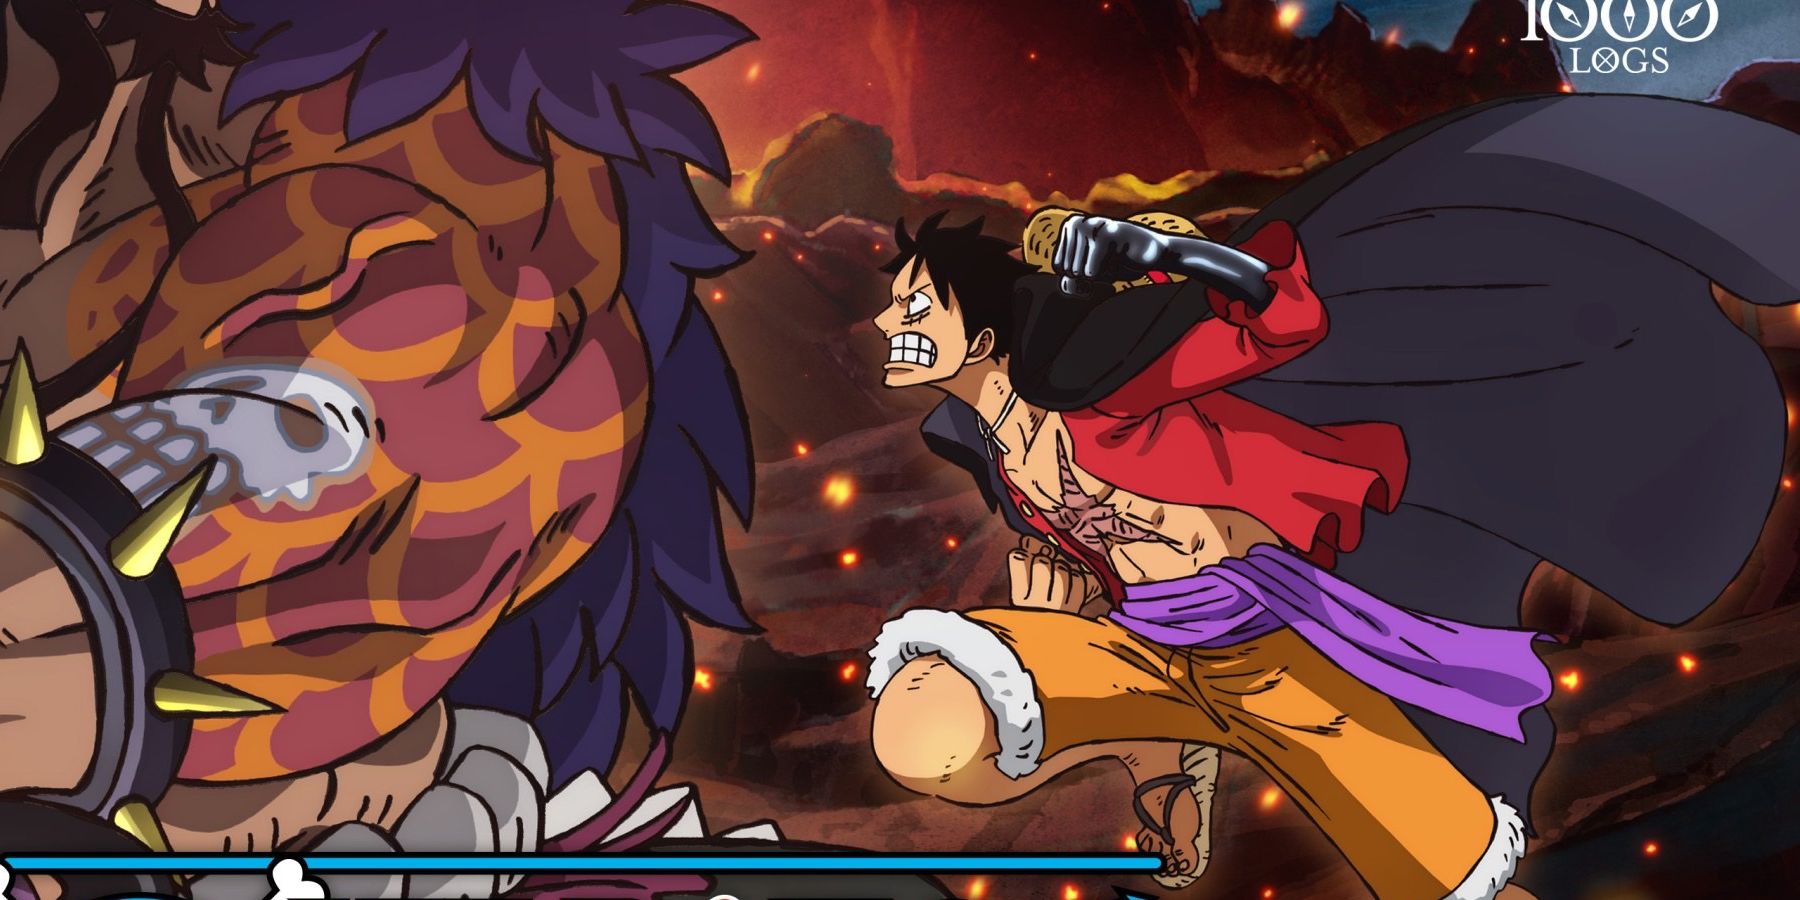 One Piece Teases 1000th Episode With Artwork Featuring An Epic Battle